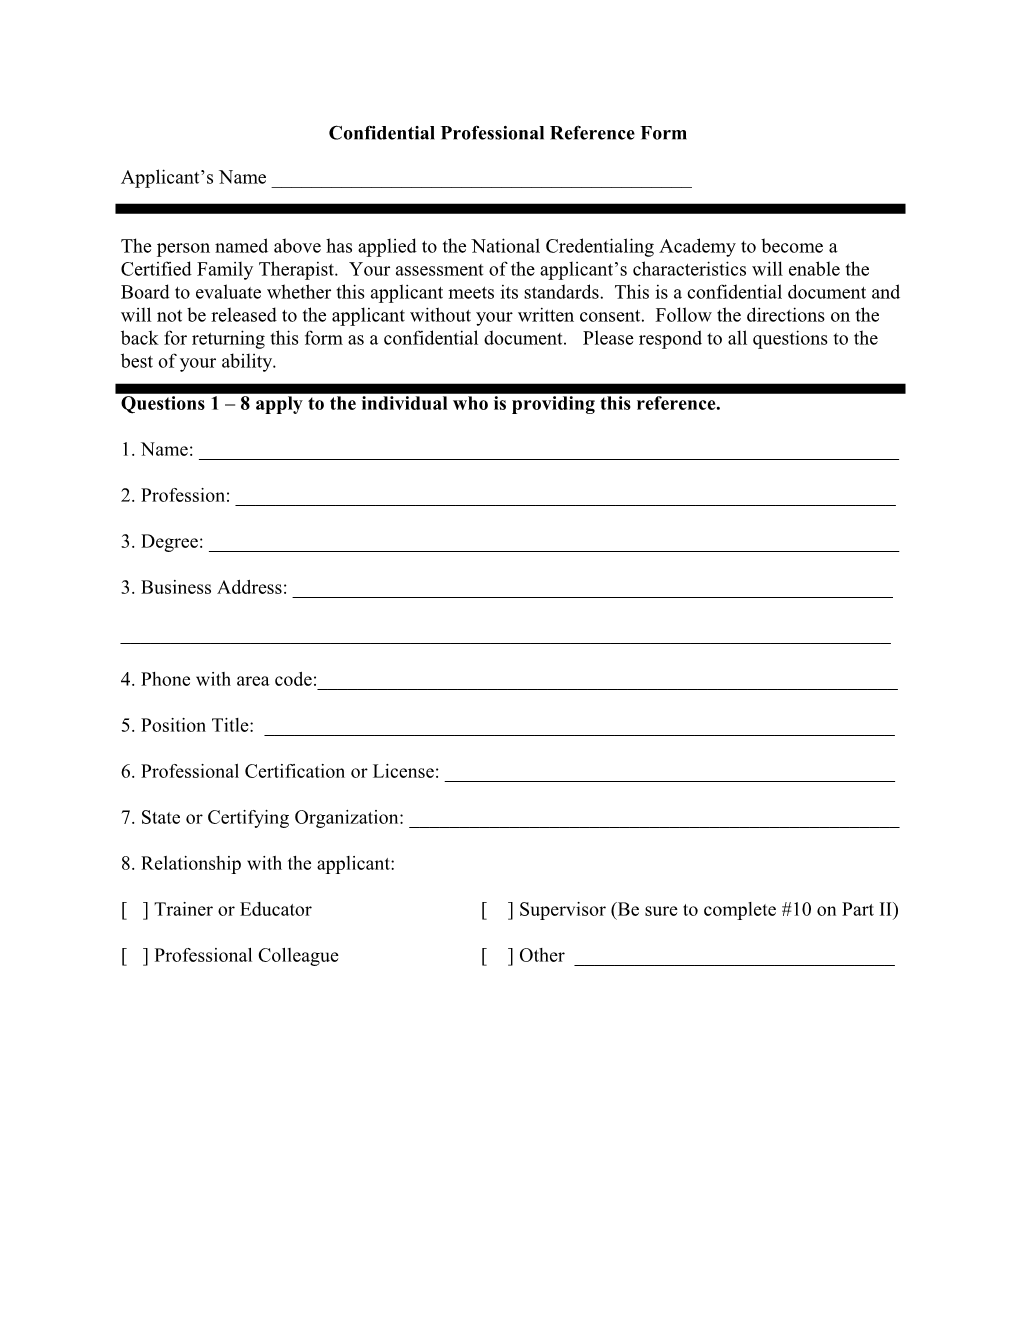 Confidential Professional Reference Form